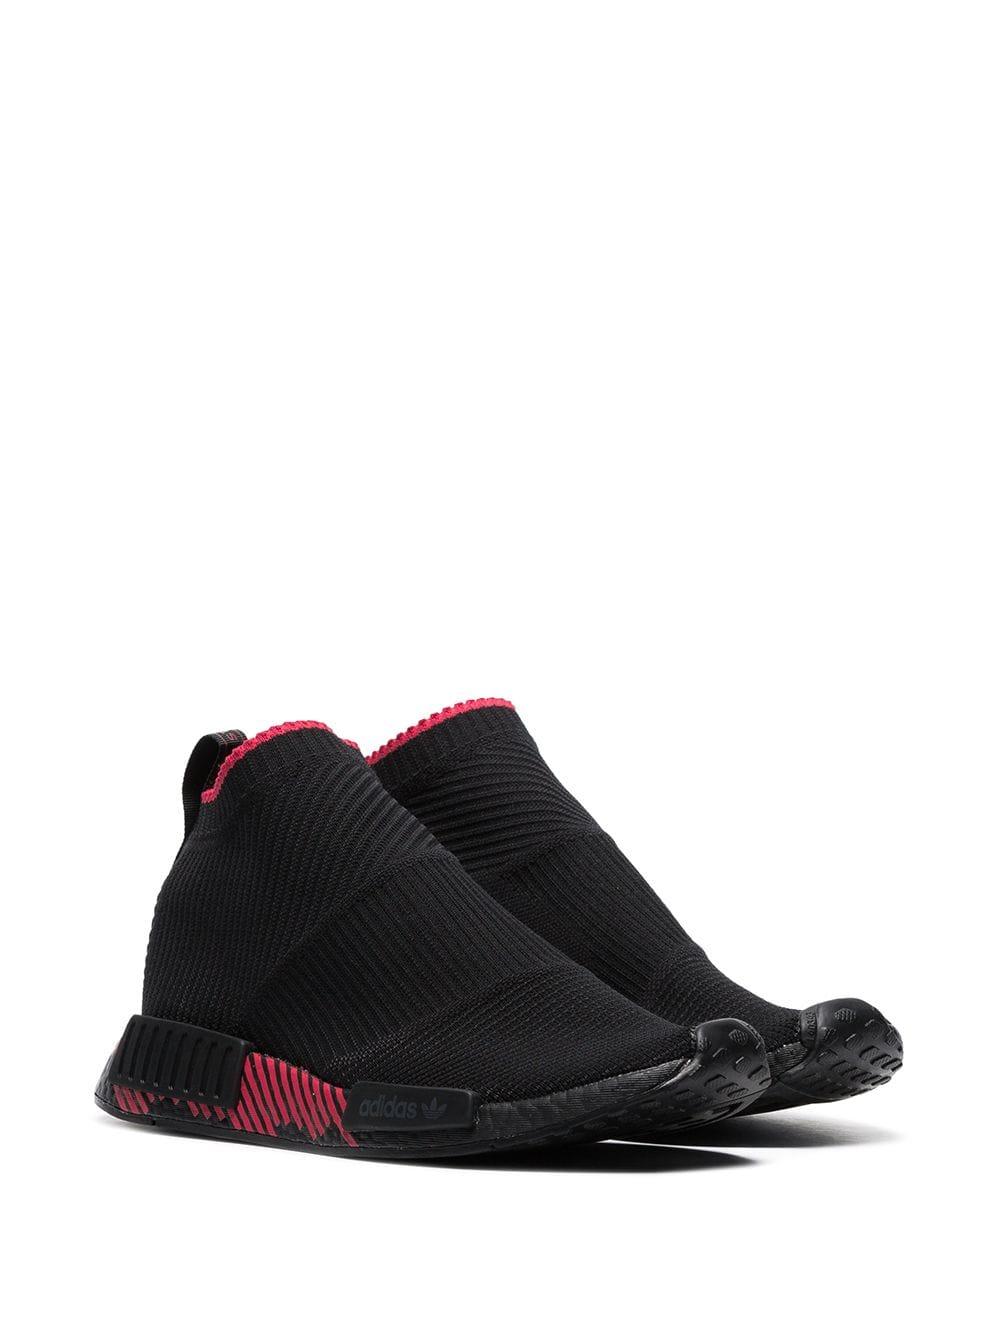 adidas Synthetic Black Nmd Cs1 Knitted Low-top Sneakers for Men - Lyst